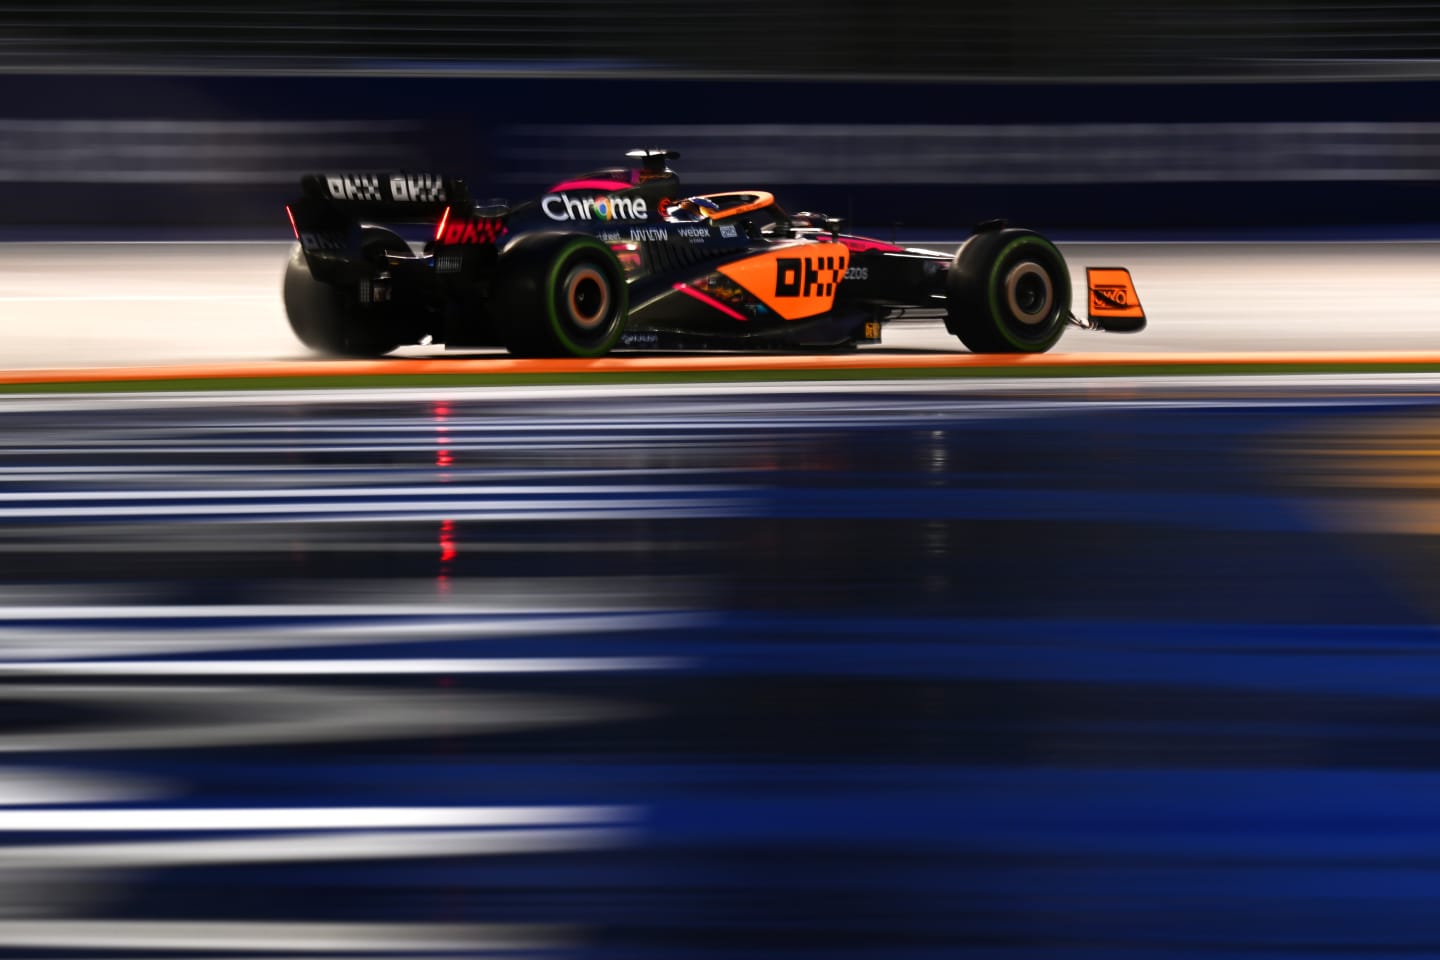 SINGAPORE, SINGAPORE - OCTOBER 01: Daniel Ricciardo of Australia driving the (3) McLaren MCL36 Mercedes on track during final practice ahead of the F1 Grand Prix of Singapore at Marina Bay Street Circuit on October 01, 2022 in Singapore, Singapore. (Photo by Clive Mason/Getty Images)